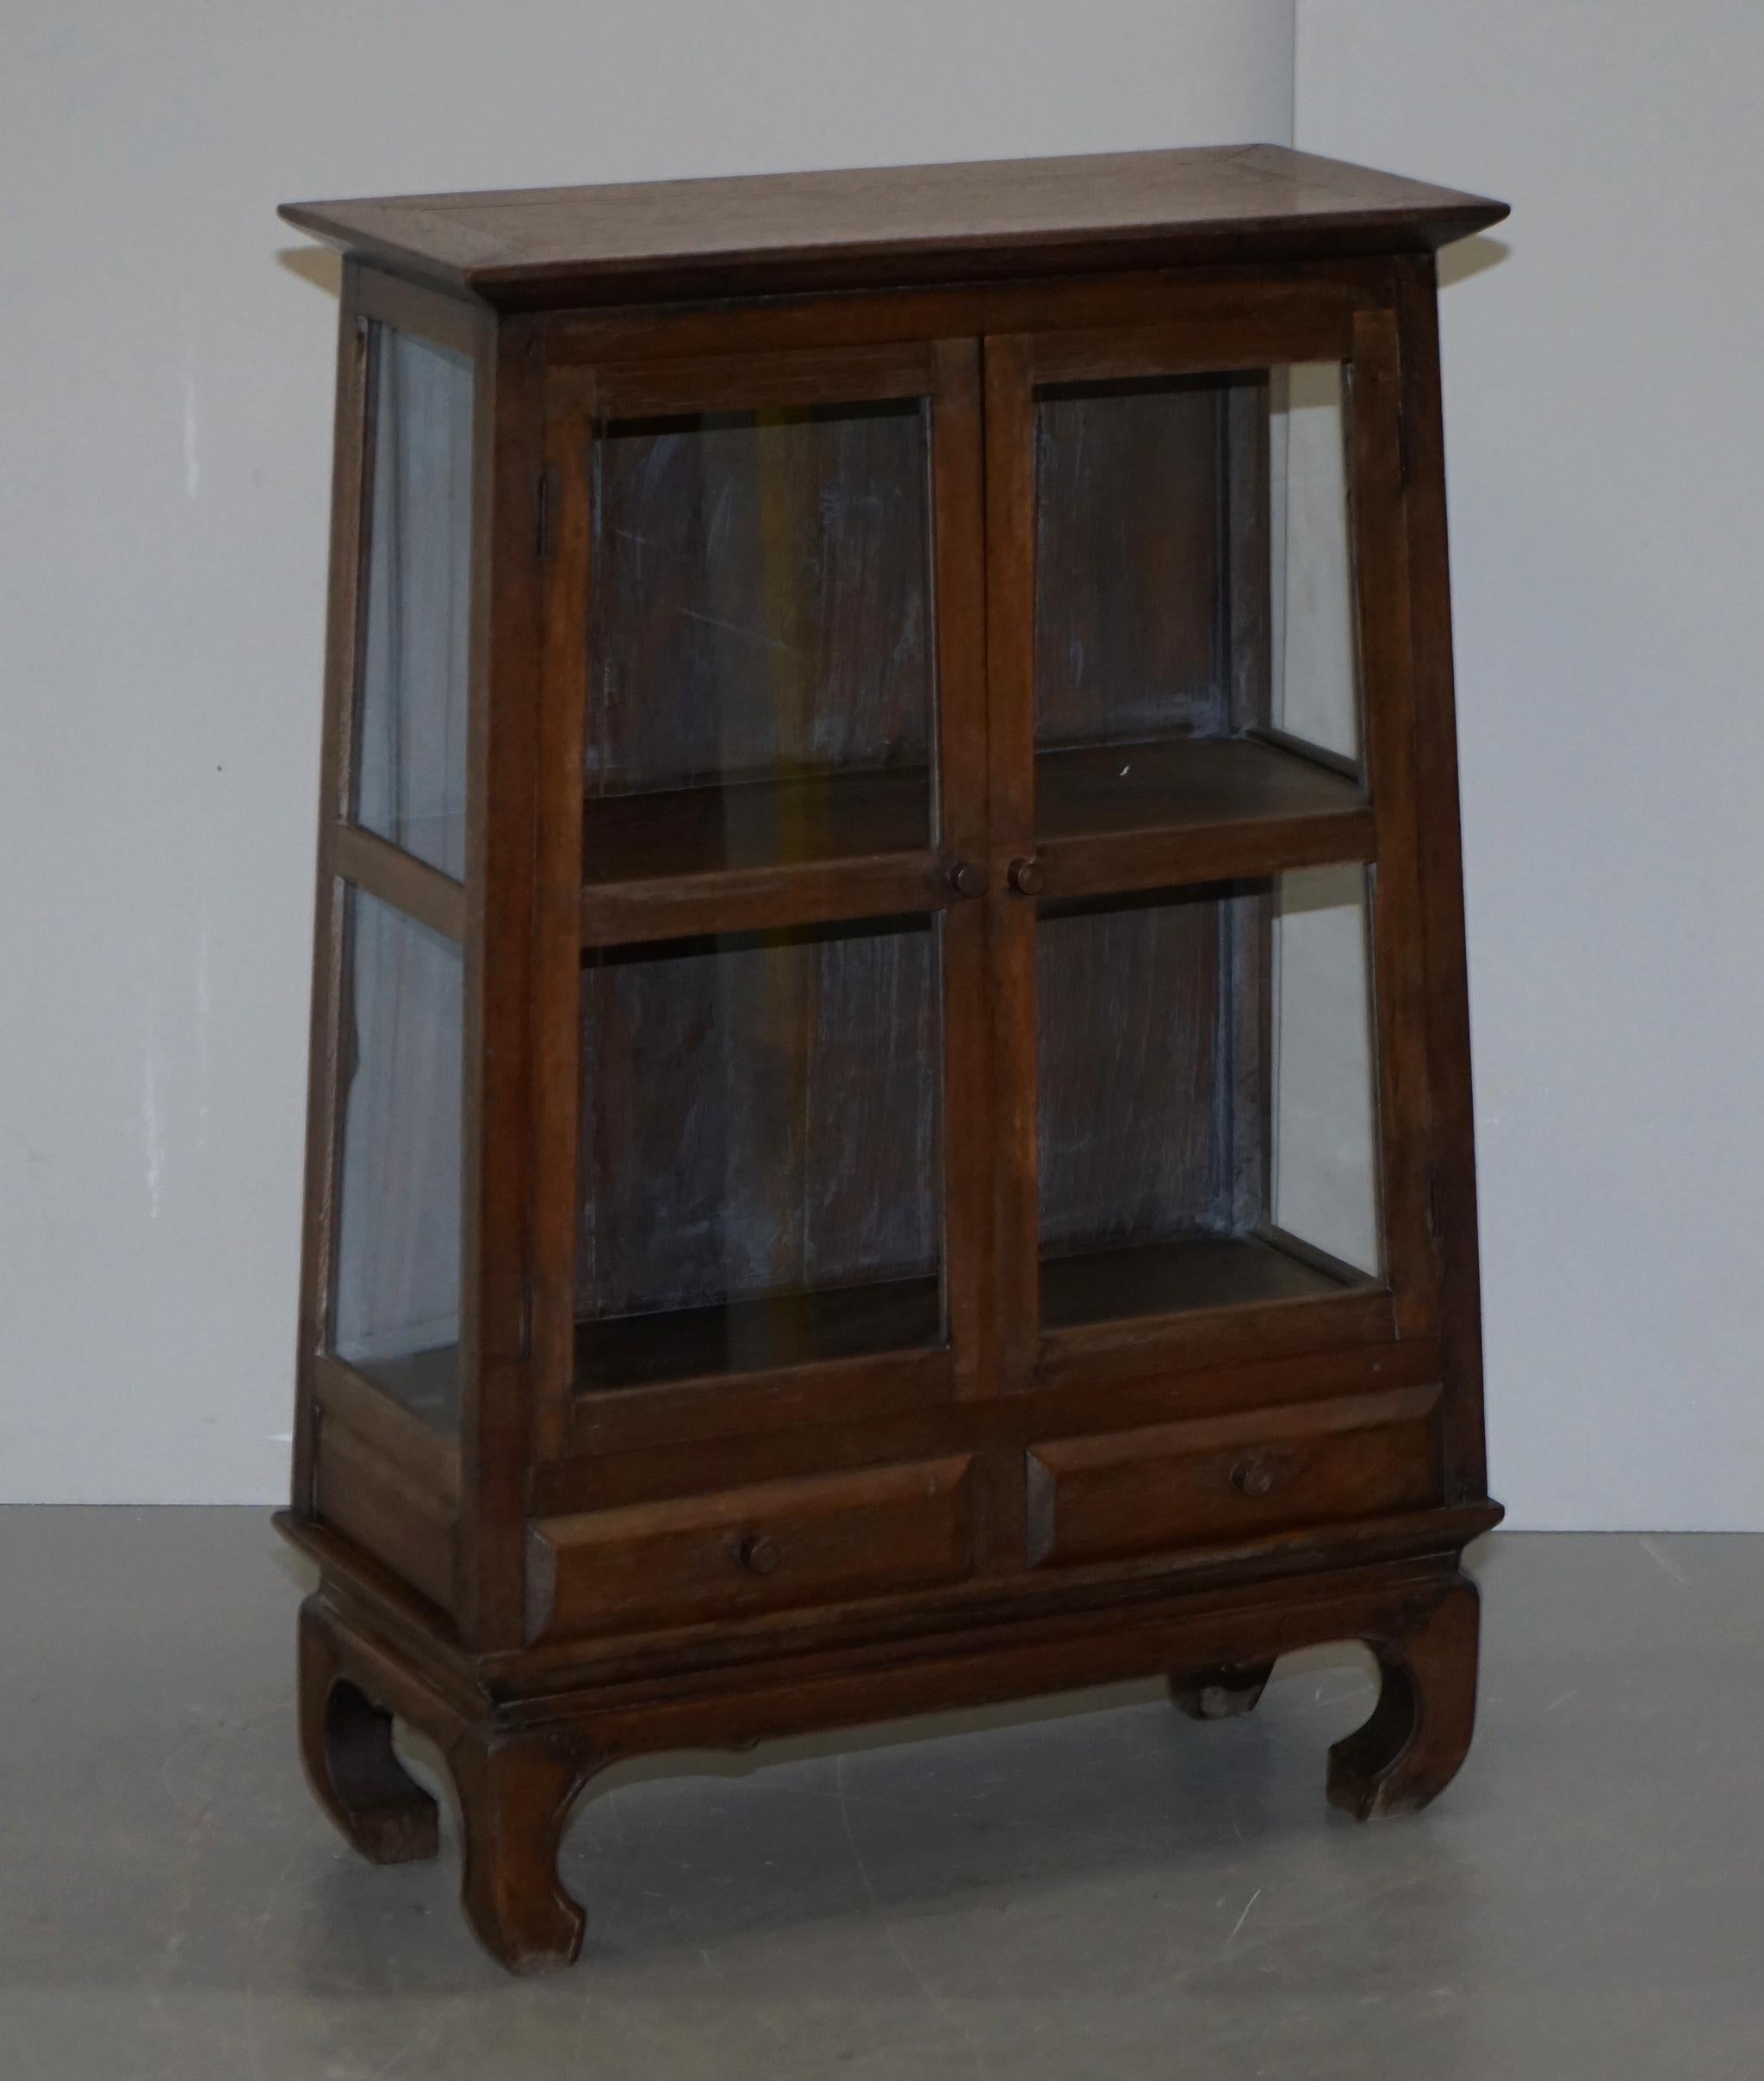 We are delighted to offer for sale this lovely pair of Chinese circa 1900 teak Alter Temple style glazed door bookcases

A good looking well made and decorative pair, they are slightly different heights however its not so much that you notice when